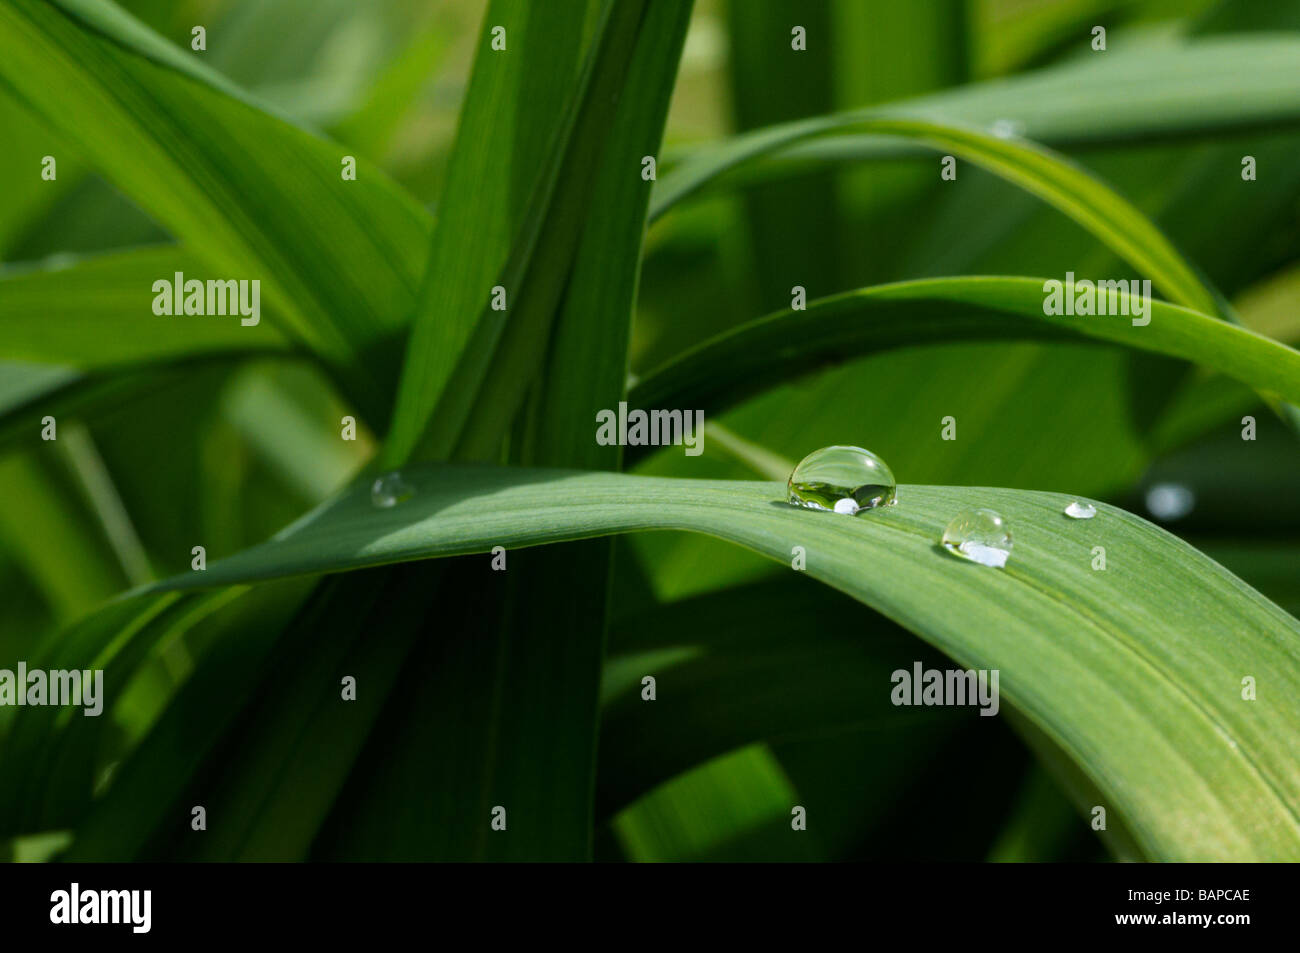 Rain Water Droplet Droplets of rain water on the fleshy foliage of a day lily plant Stock Photo